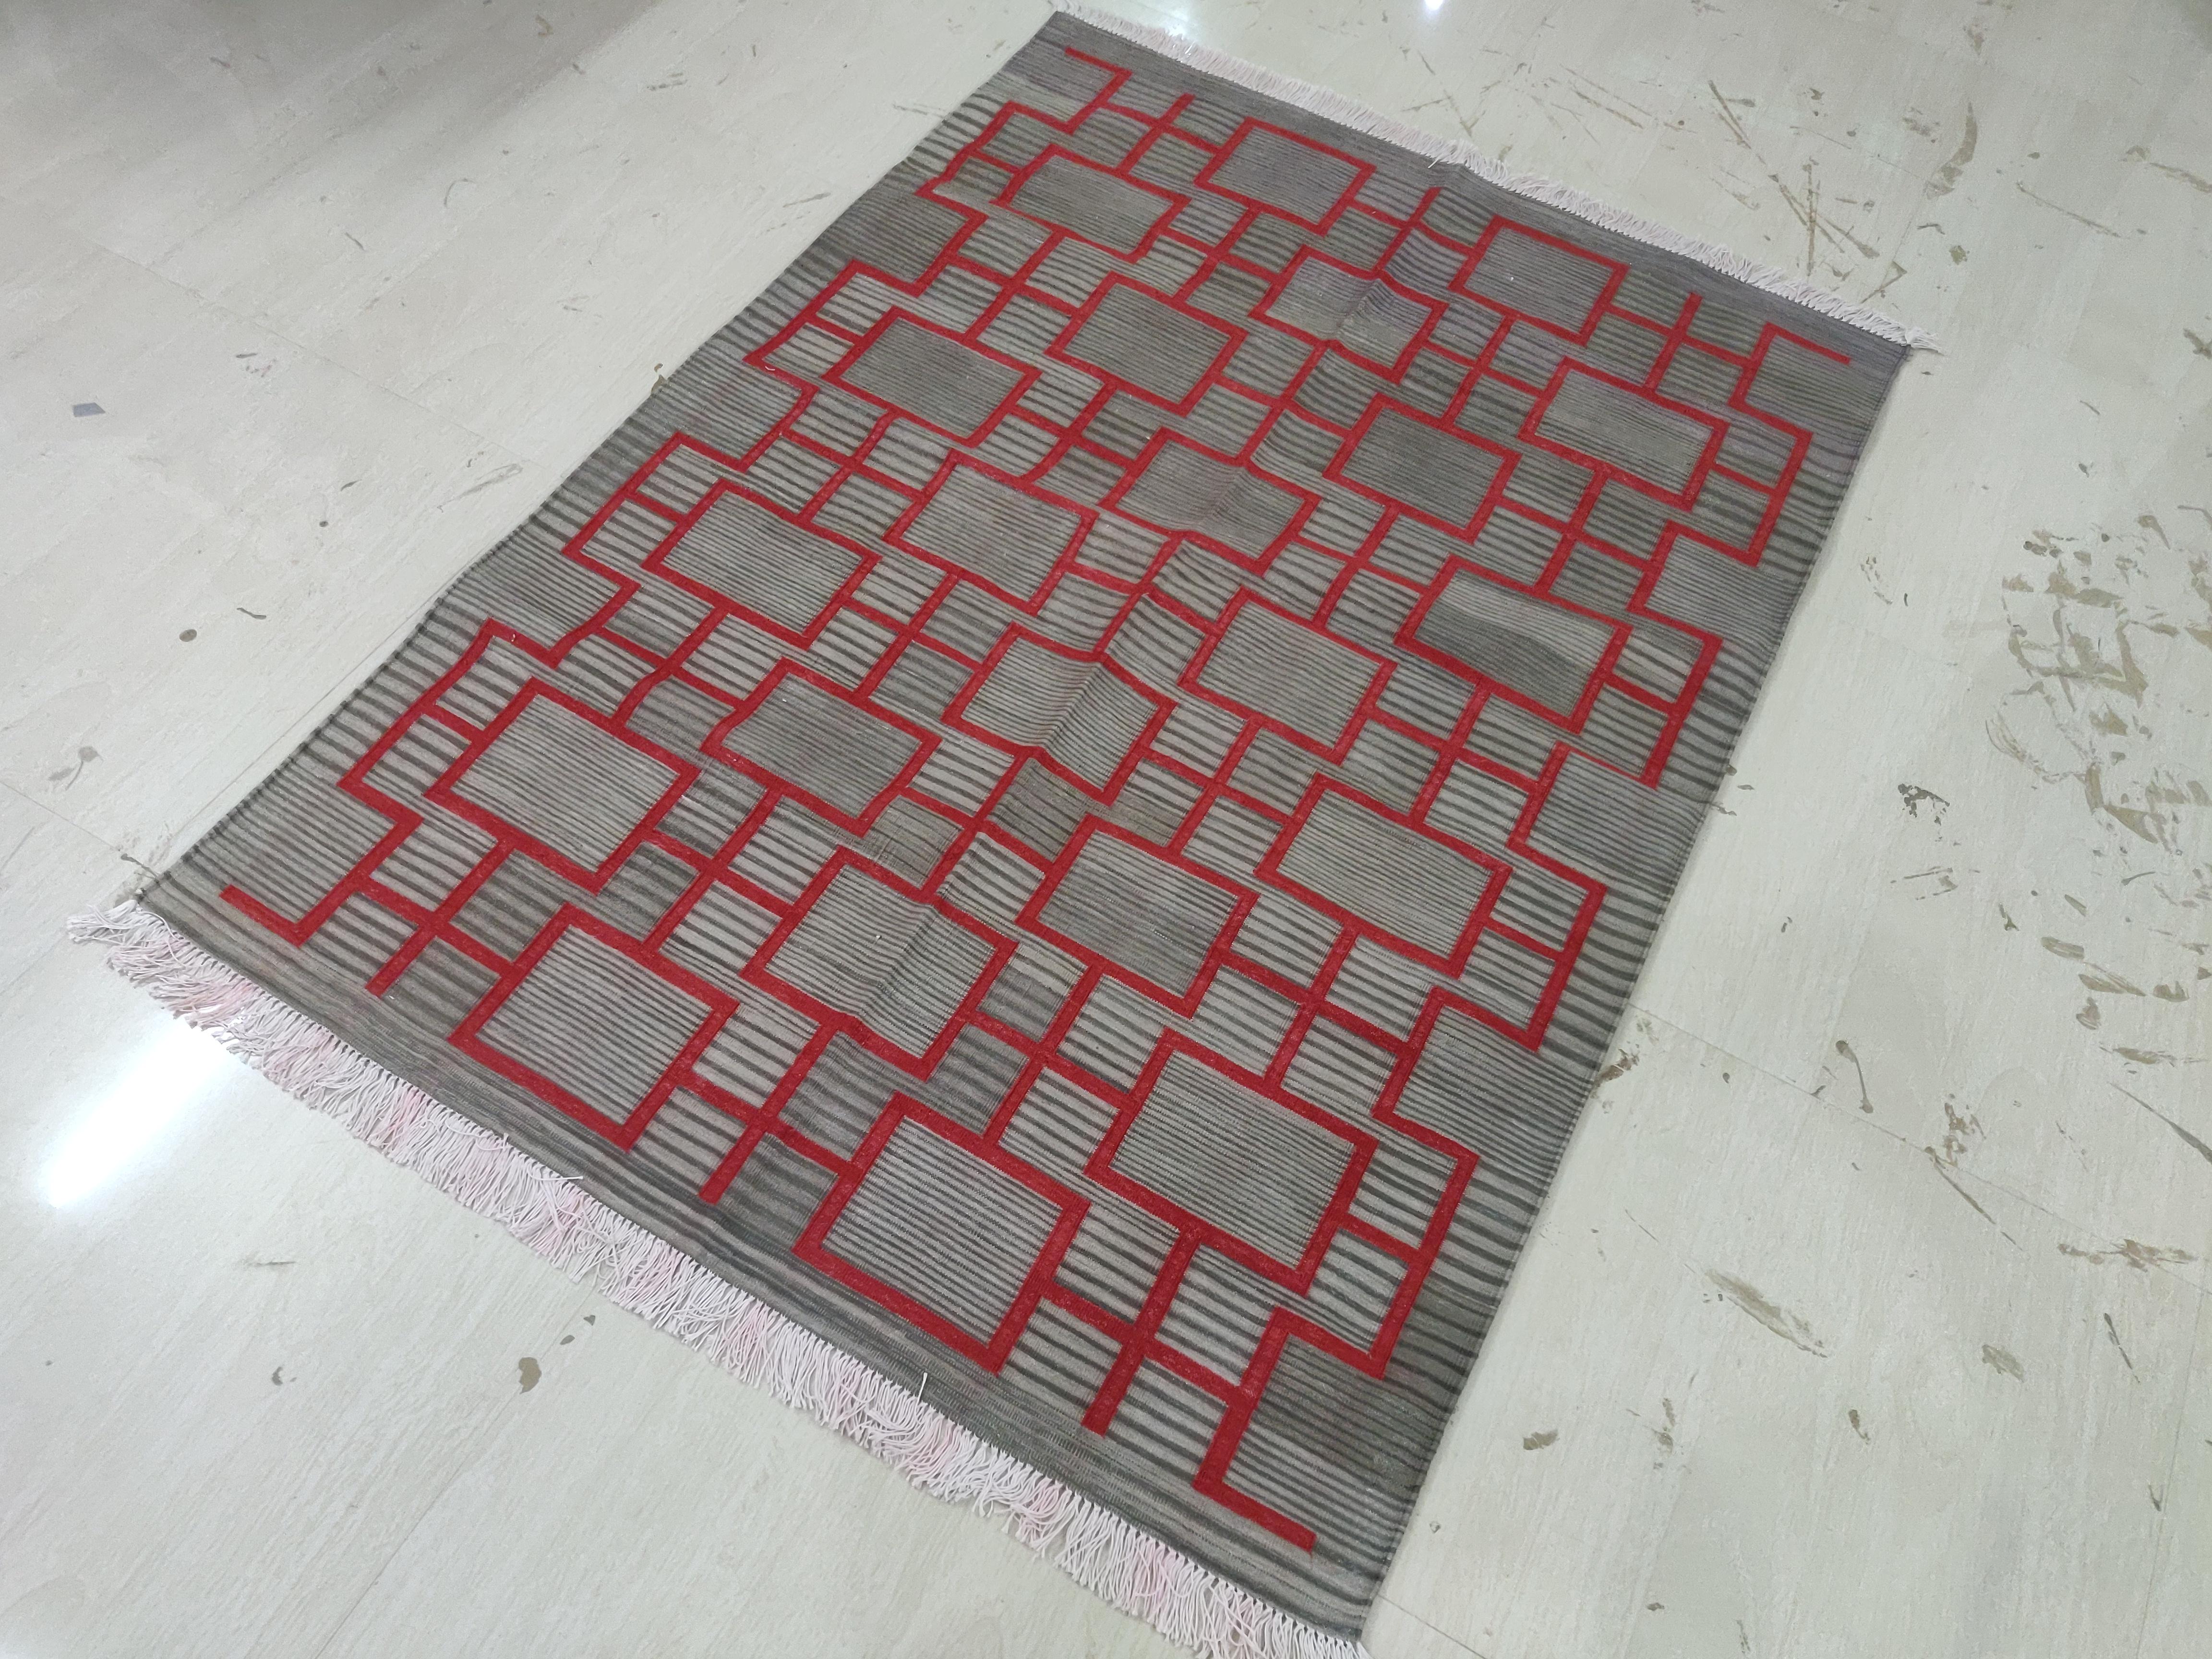 Cotton Vegetable Dyed Brown And Red Geometric Indian Dhurrie Rug-4'x6' 

These special flat-weave dhurries are hand-woven with 15 ply 100% cotton yarn. Due to the special manufacturing techniques used to create our rugs, the size and color of each